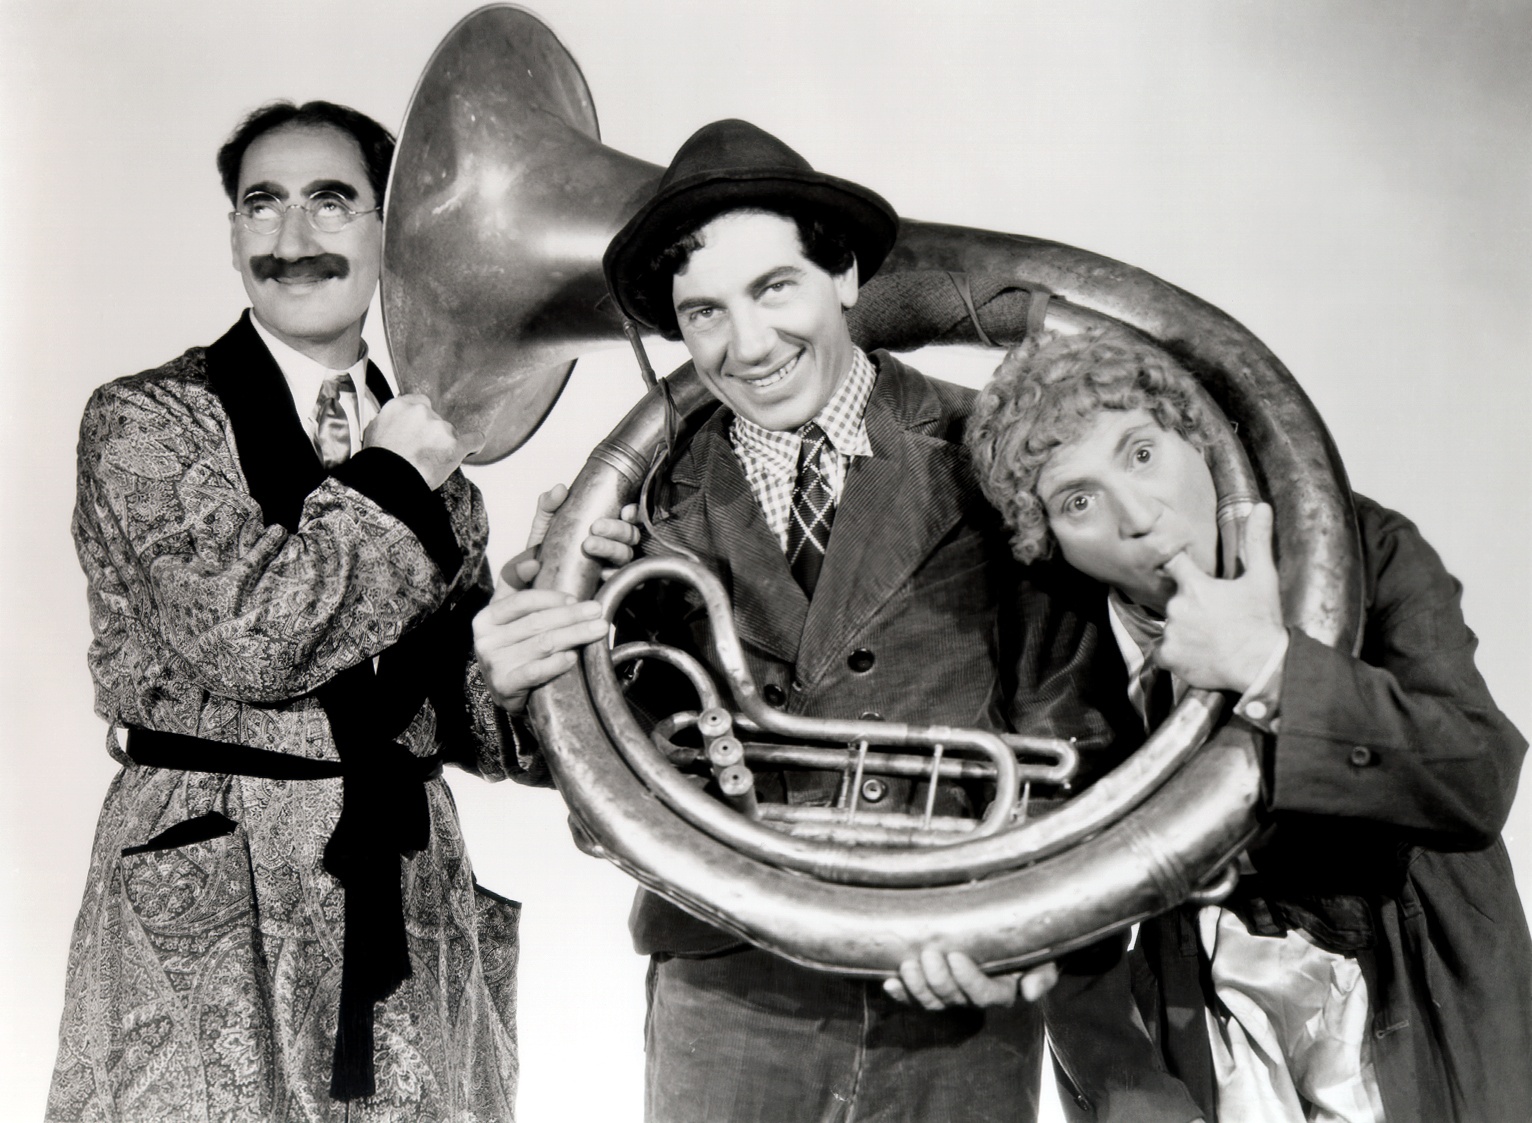 marx-brothers-a-day-at-the-races_01.jpg